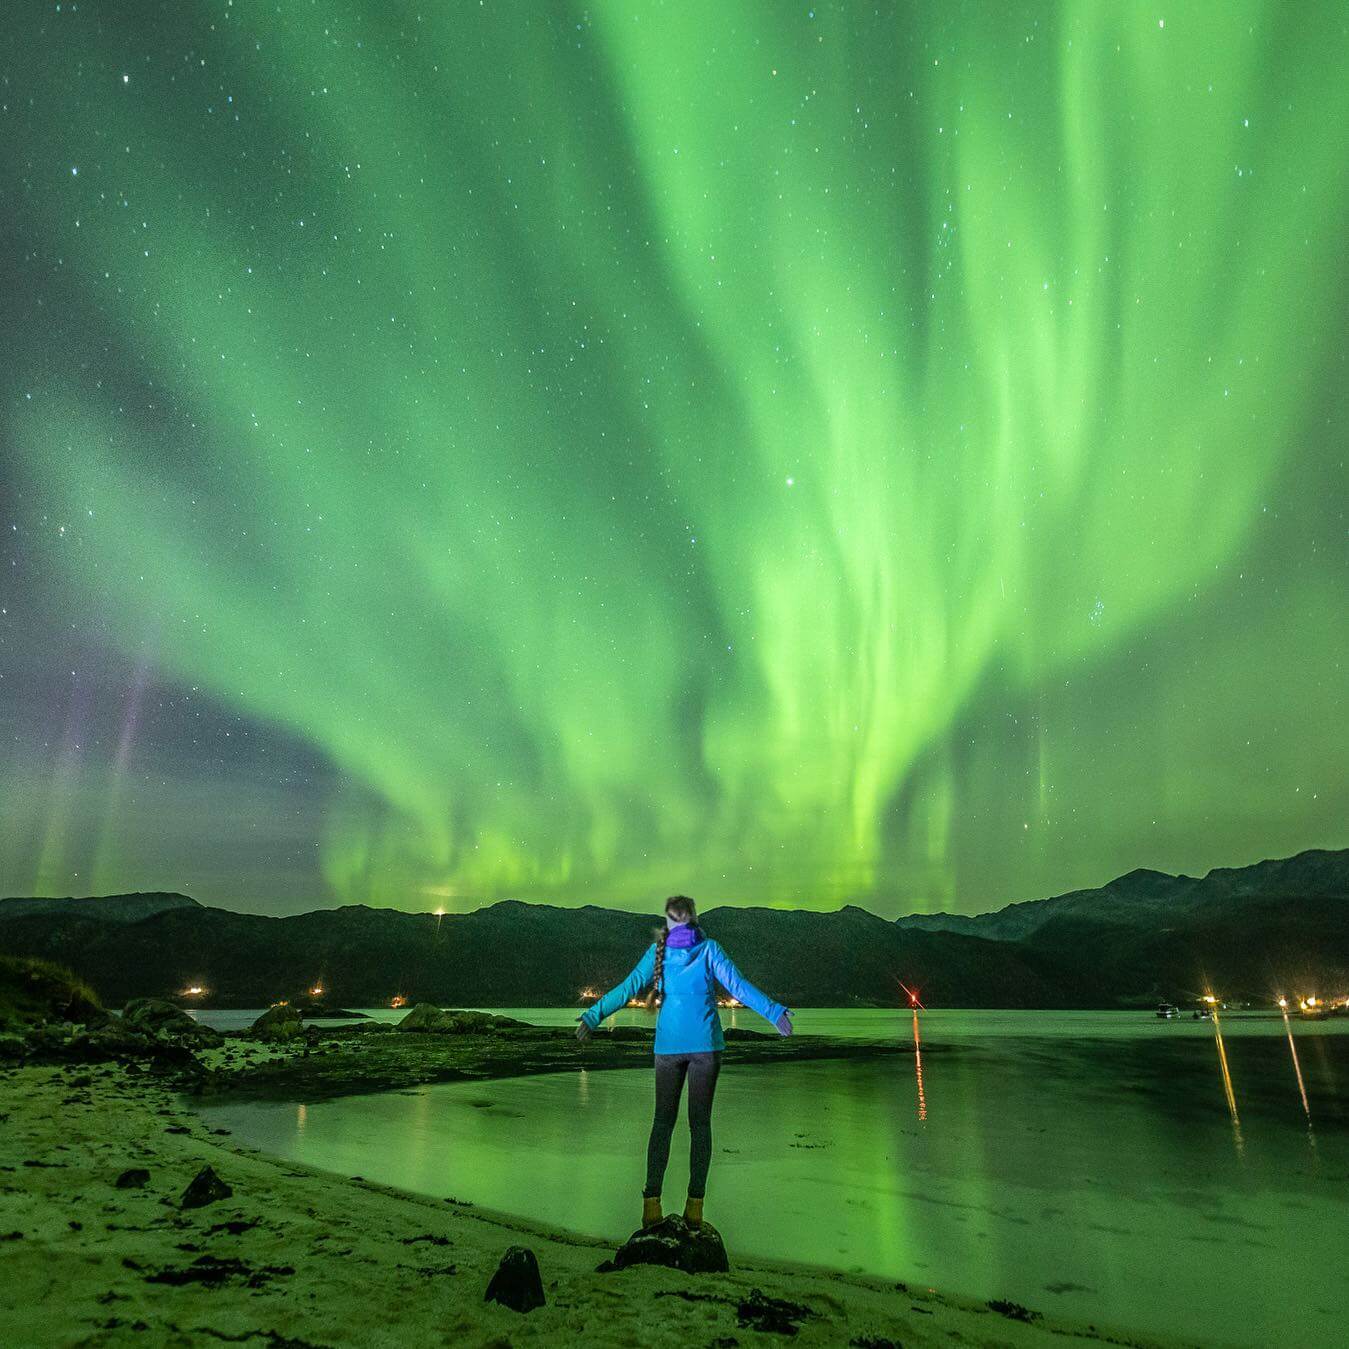 It’s been a while since our last post…We have been busy running tours to fulfill your dreams to see the Lights. 
Thank you for the trust and your support. 🙏
•
•
•
•

#tromsø #northernnorway #visittromso #northnorway2day #northernlights #tromsolove #naturephotography #lovenature #aurora #worldaurora #norge #norgefoto #worldaurora #visitnorway #auroraborealis #ig_nordnorge #canon #mittnorge #norwayphotos #auroraborealblog #norway #dreamchasersnorway #thebestofnorway #tromsomoment #ig_auroraborealis #natgeotravel #nortrip #trust #support